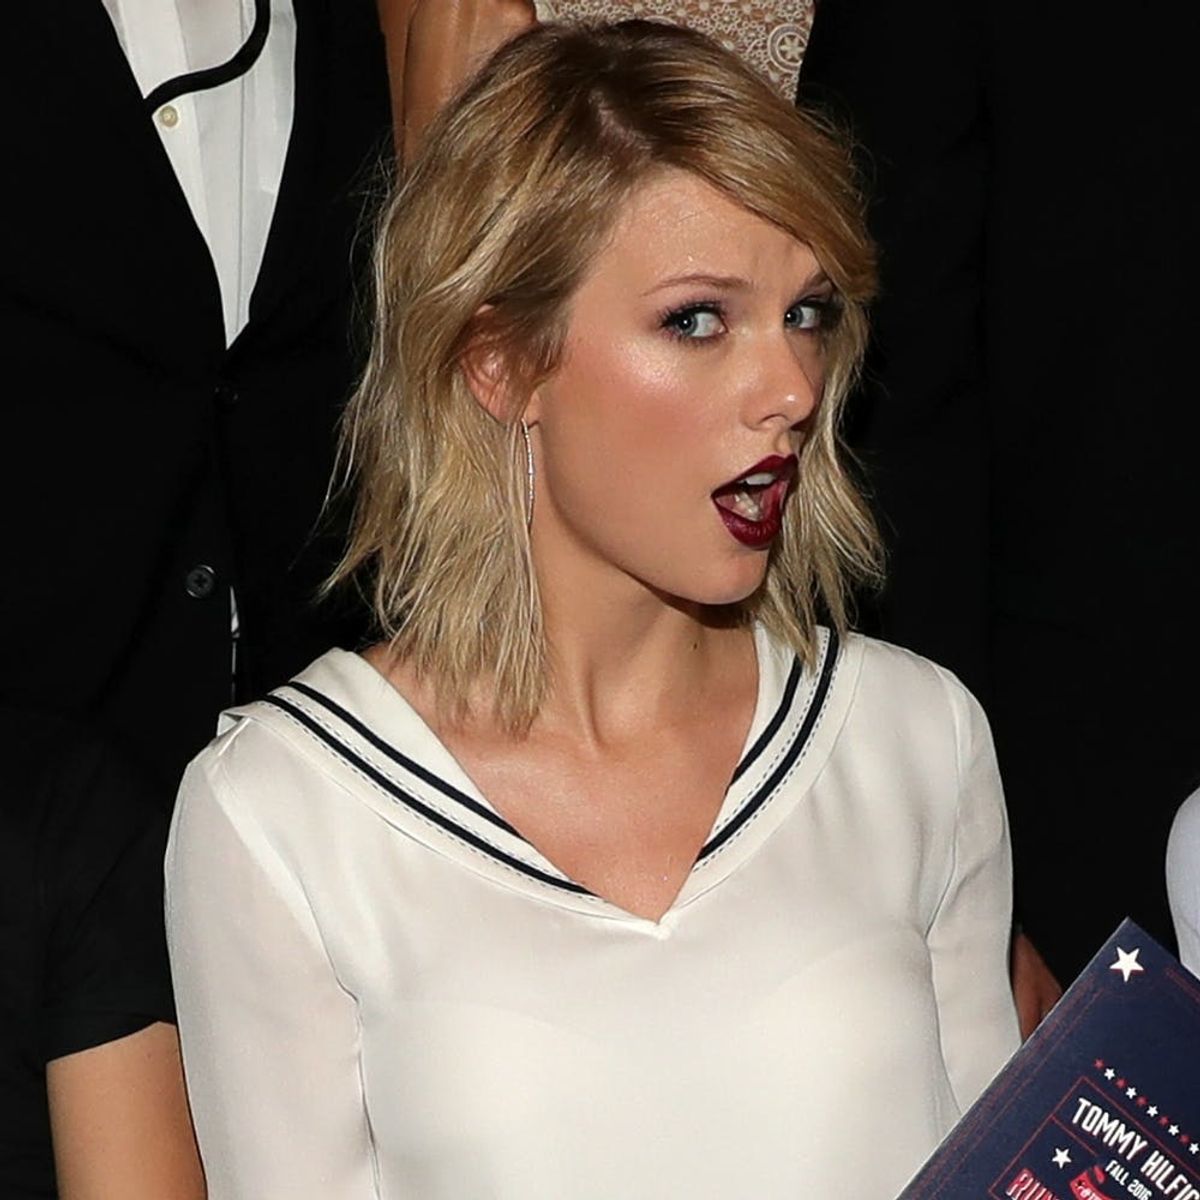 Read the Insane Taylor Swift Conspiracy Theory That Just Resurfaced in the Wake of Her Breakup